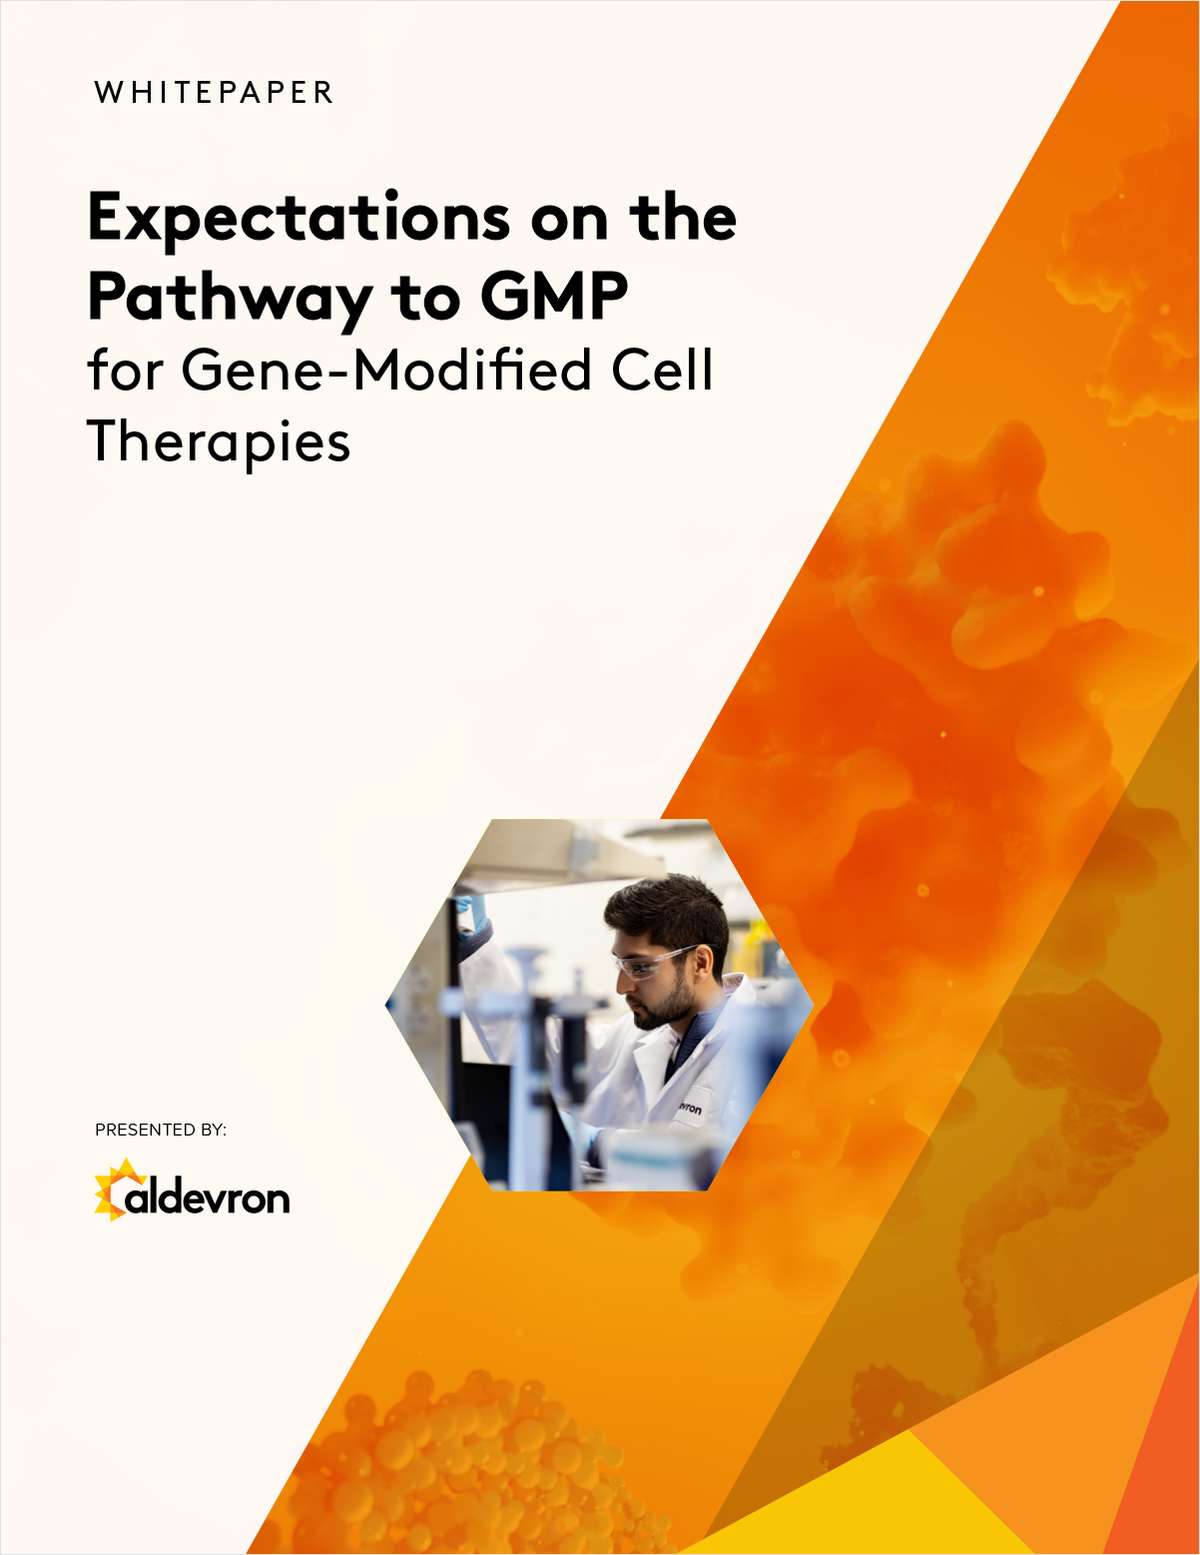 Pathway to GMP Expectations for Gene-Modified Cell Therapies